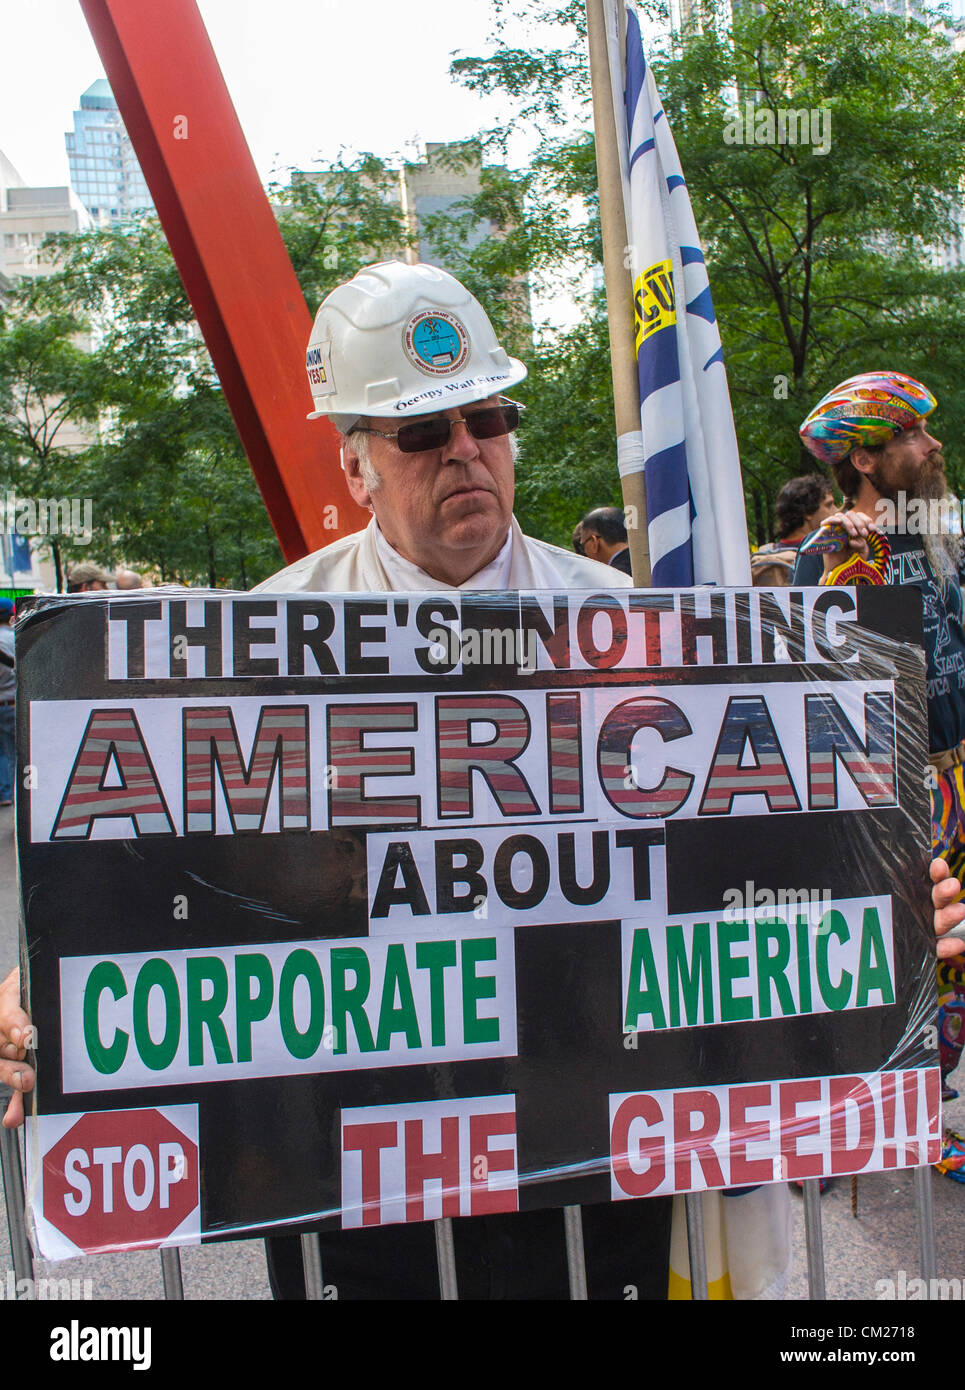 New York City, NY, USA, Protester Holding Protest Sign, Corporate Greed, "Occupy Wall Street", Portrait, Man in Hard Hat Stock Photo